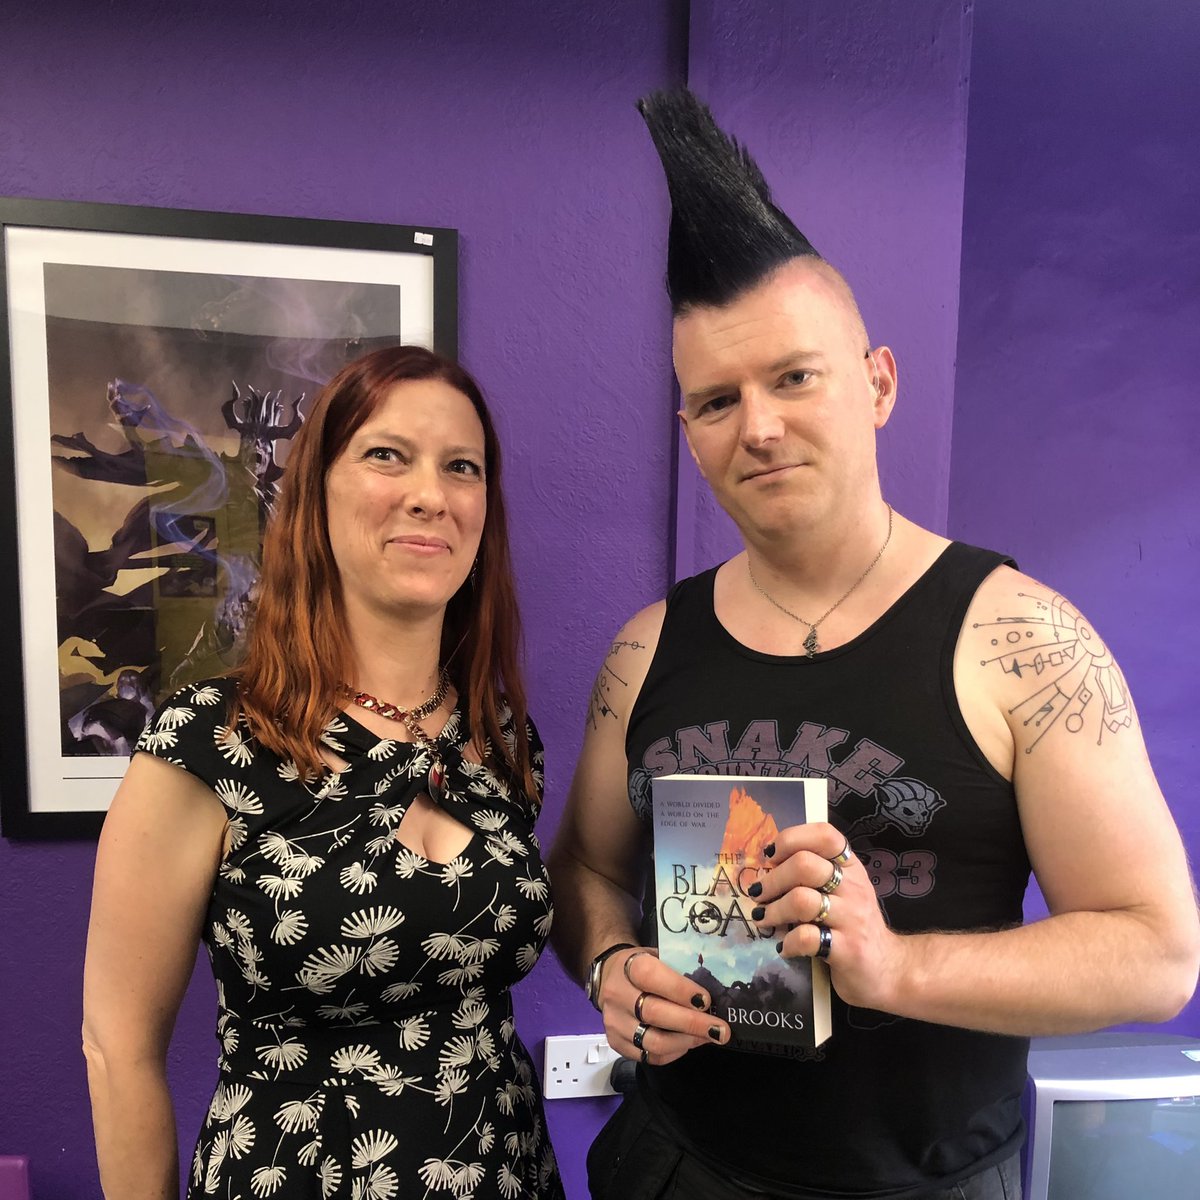 Awesome interview of @MikeBrooks668 by @Wstonesipswich . Thank you for putting on this event. It was great to meet you, Mike. The hair is every bit as awesome as it appears online. I’m off home to read The black Coast now. https://t.co/Ki88DgZ1ud